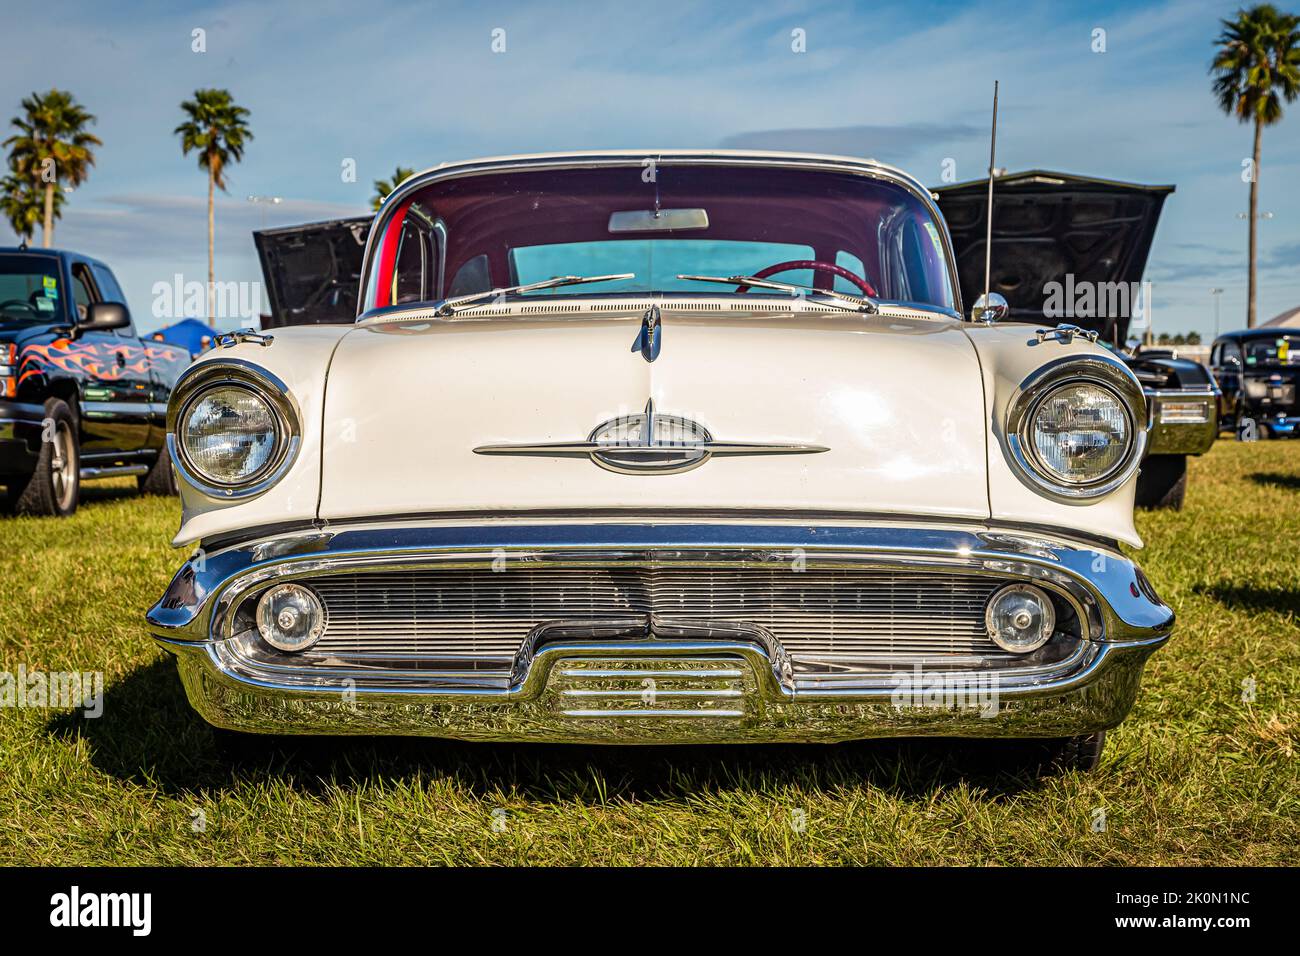 Daytona Beach, FL - November 24, 2018: Low perspective front view of a 1957 Oldsmobile Golden Rocket 88 Holiday Hardtop Coupe at a local car show. Stock Photo